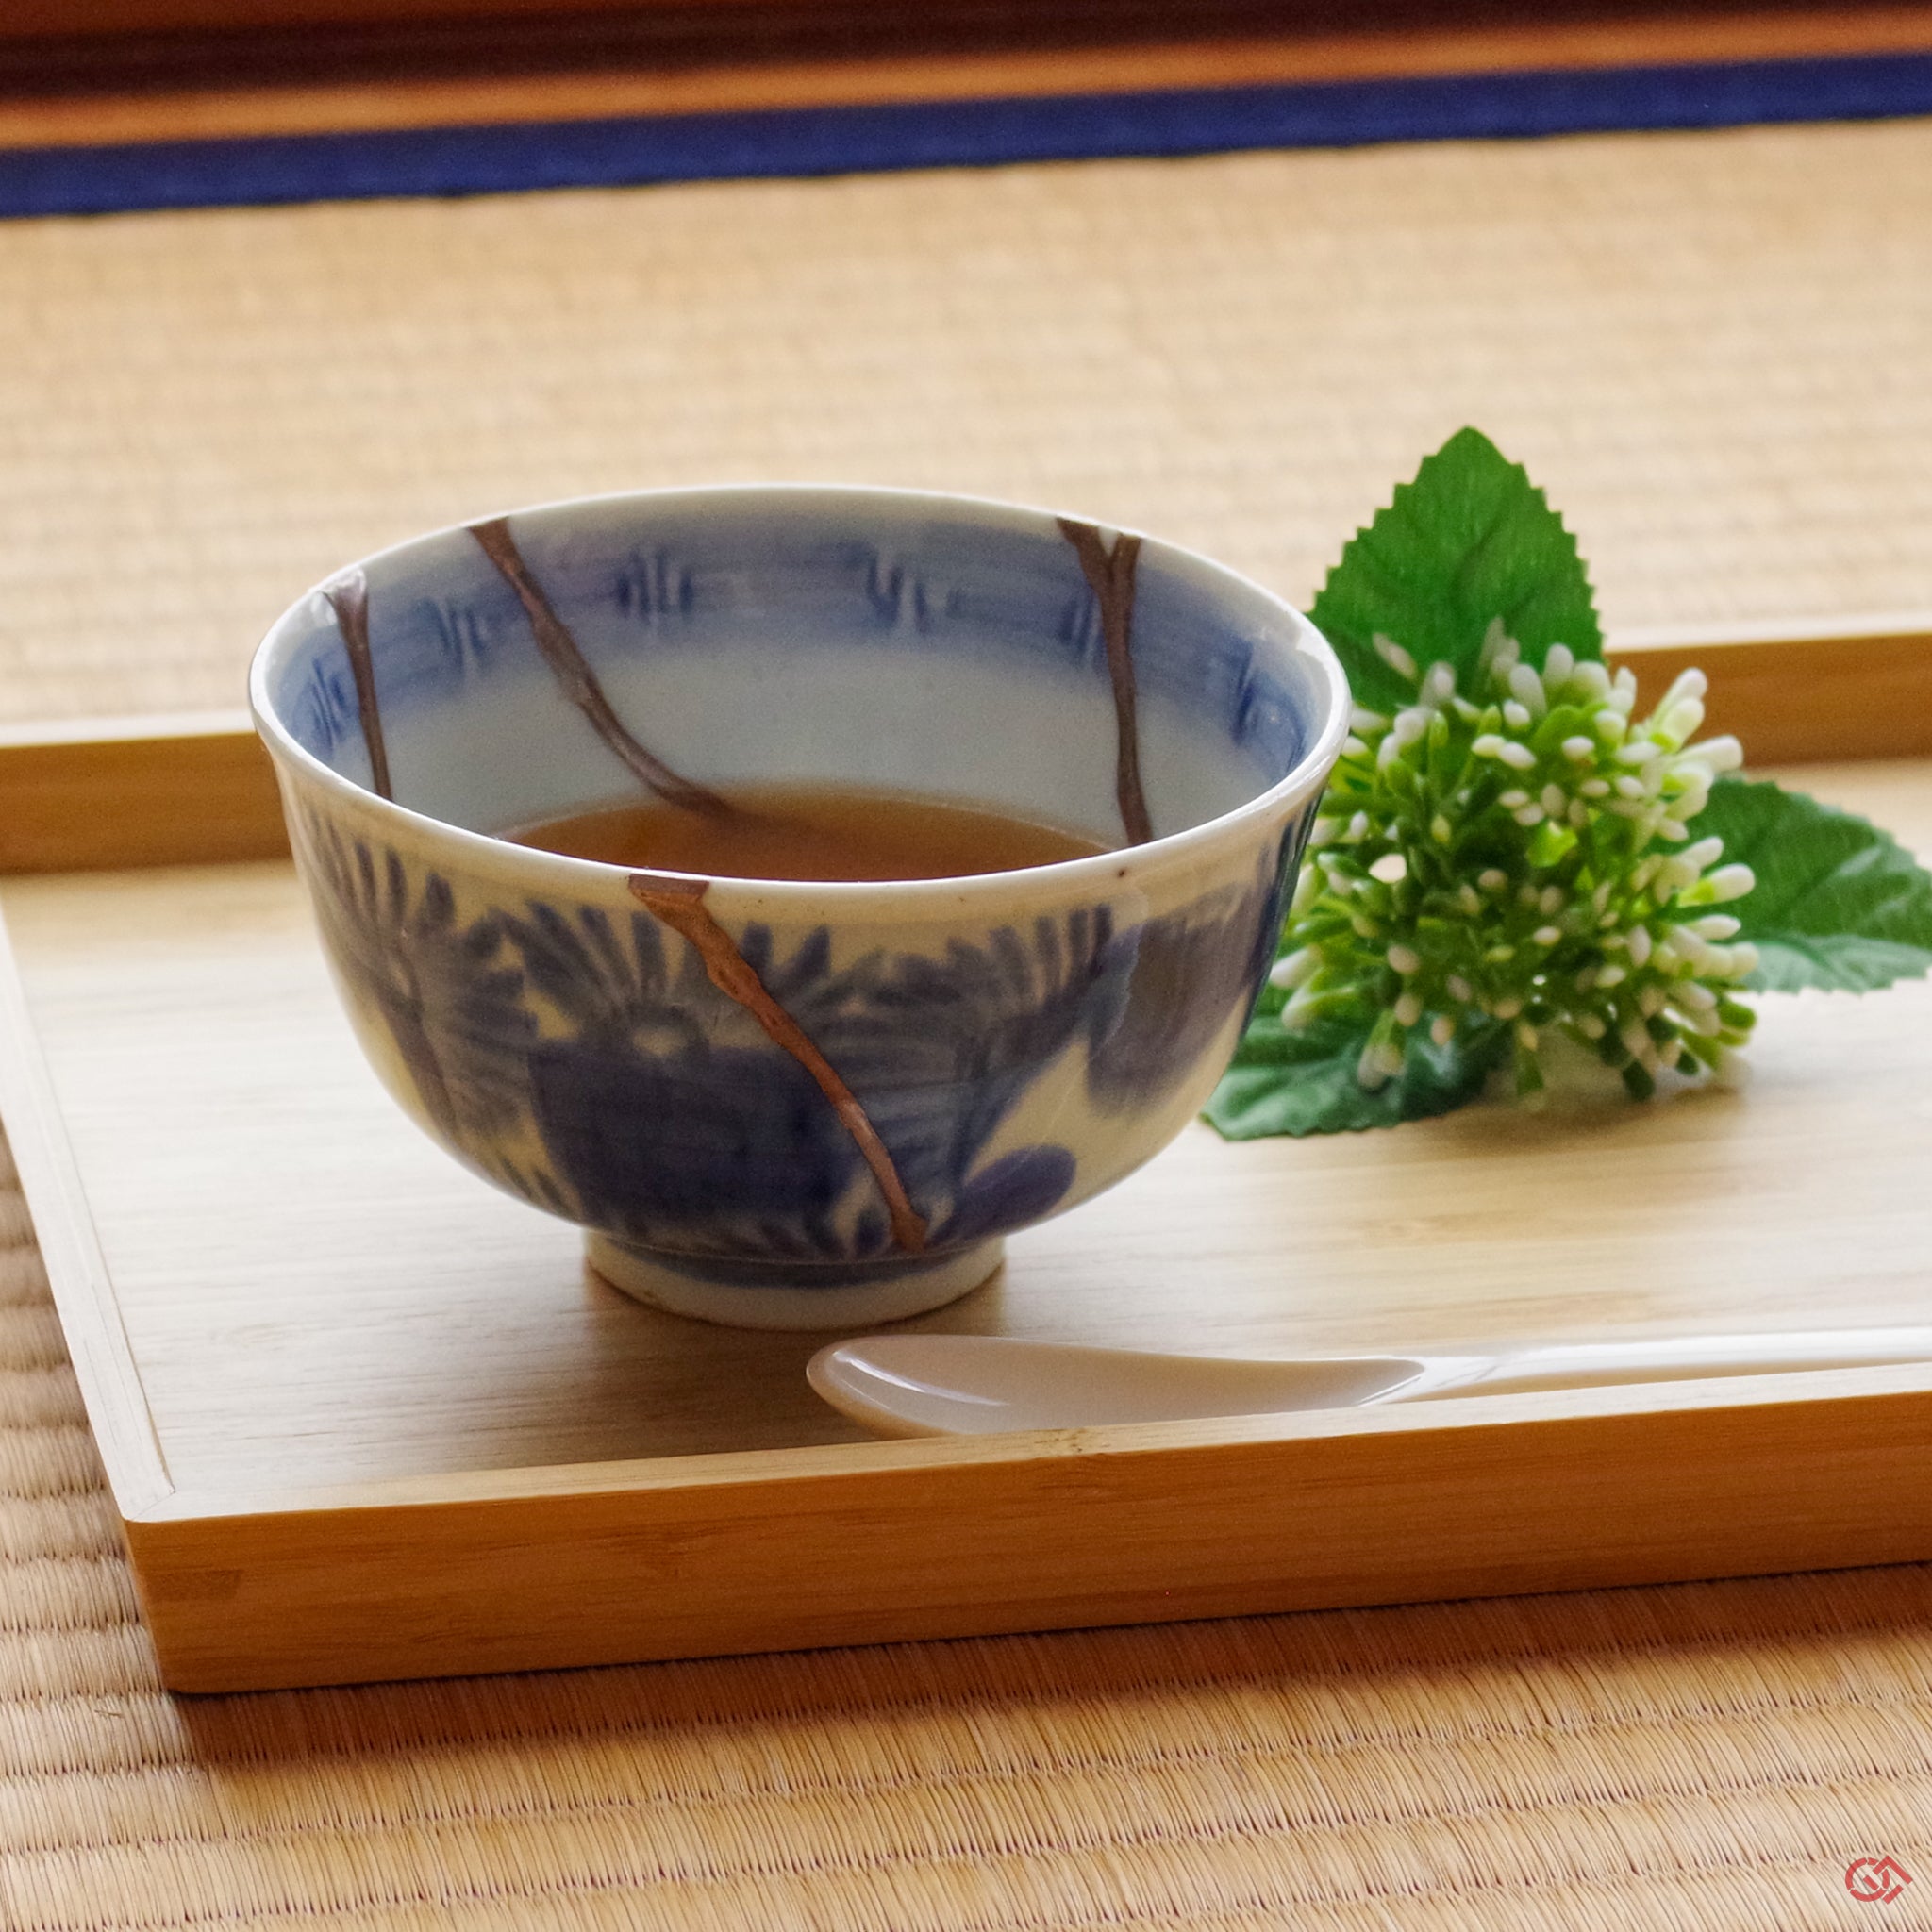 A photo of an authentic Kintsugi pottery piece being used in a real-world setting, such as a cup of soup being poured into a Kintsugi cup.